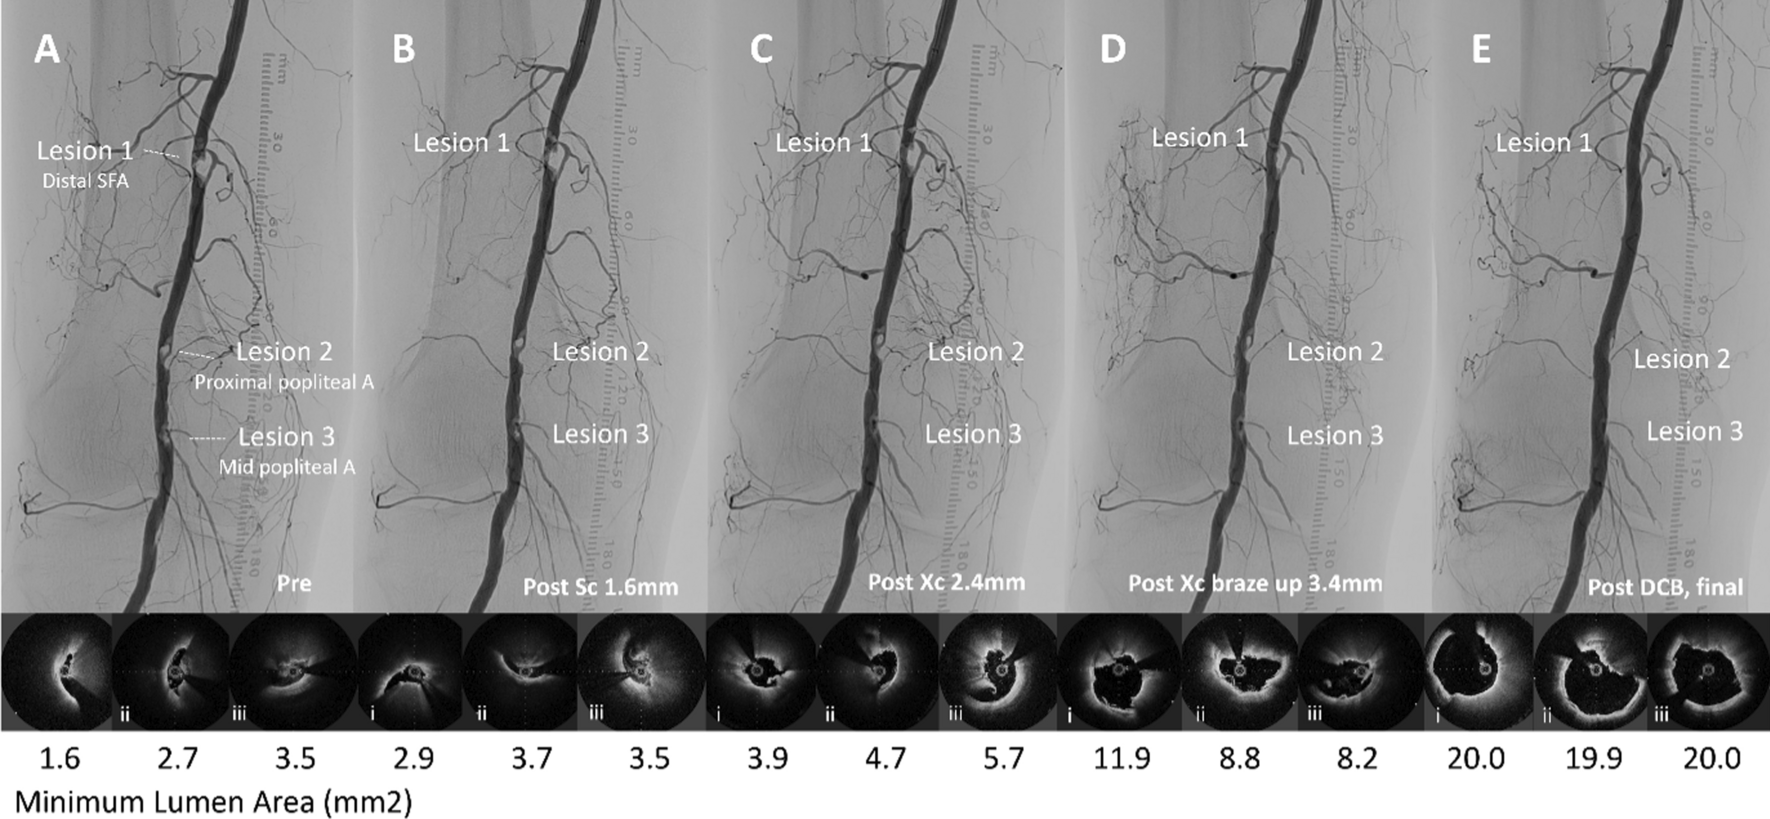 Optical Frequency Domain Imaging to Quantify the Amount of Calcification in Femoropopliteal Artery Lesions Treated with Atherectomy Devices